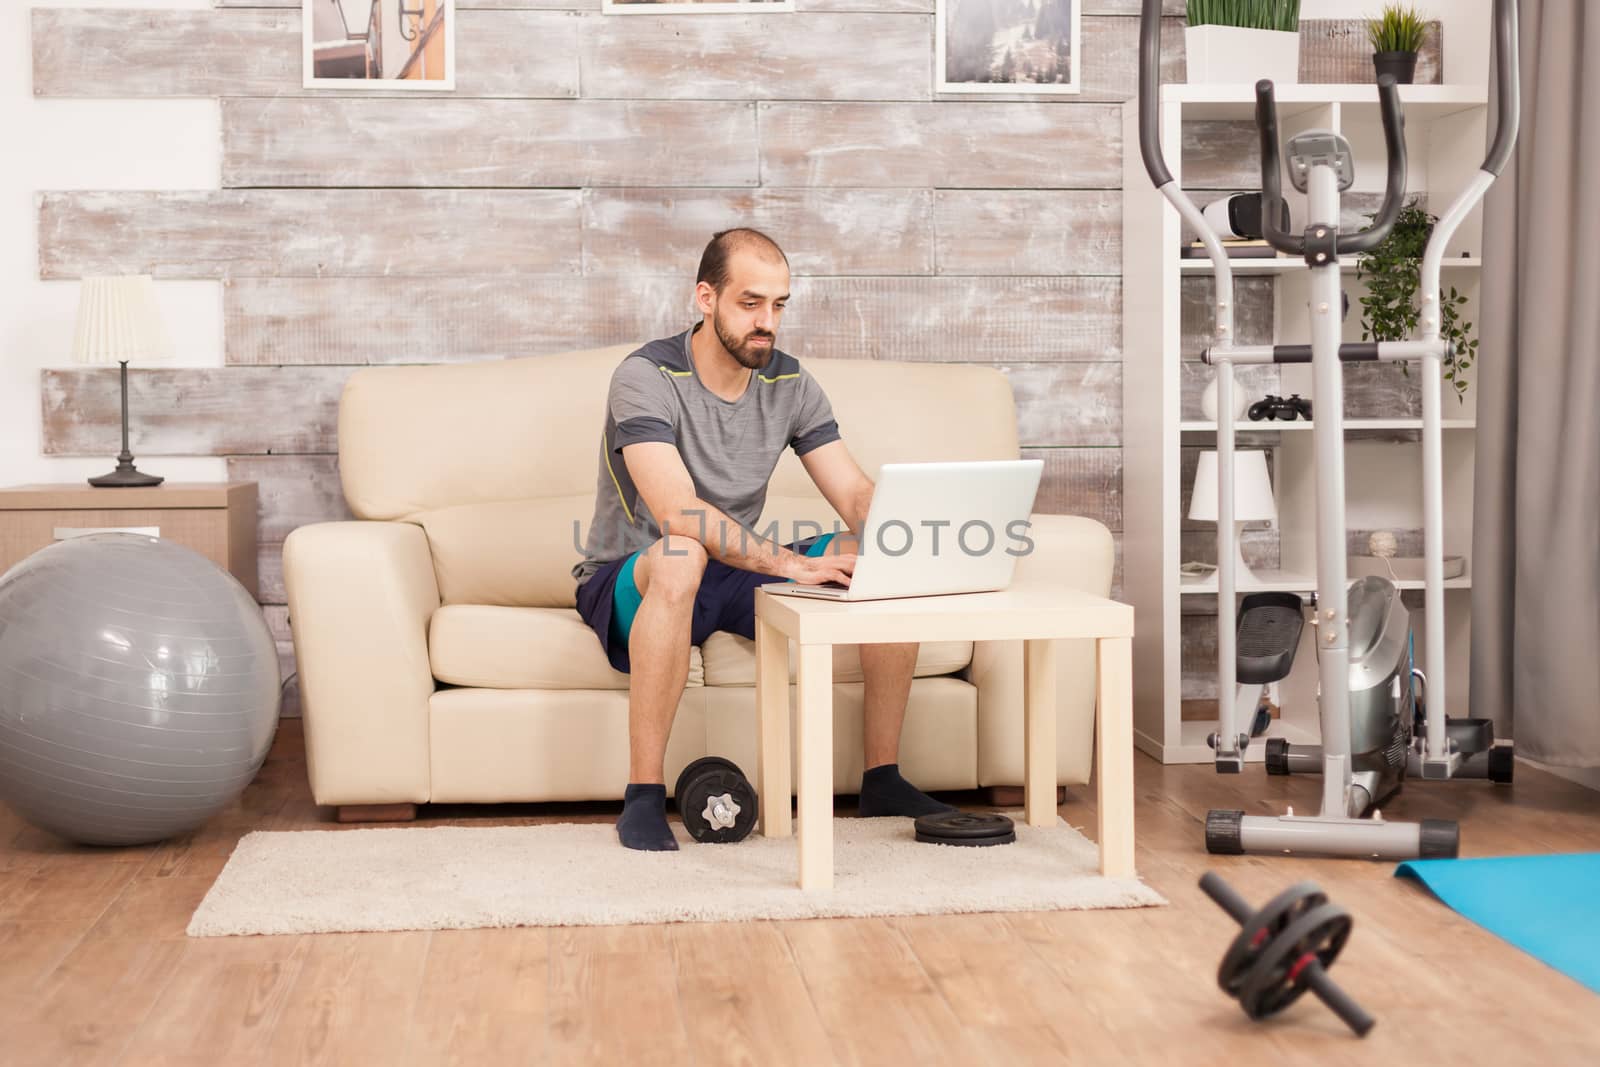 Athletic man in home searching online training by DCStudio